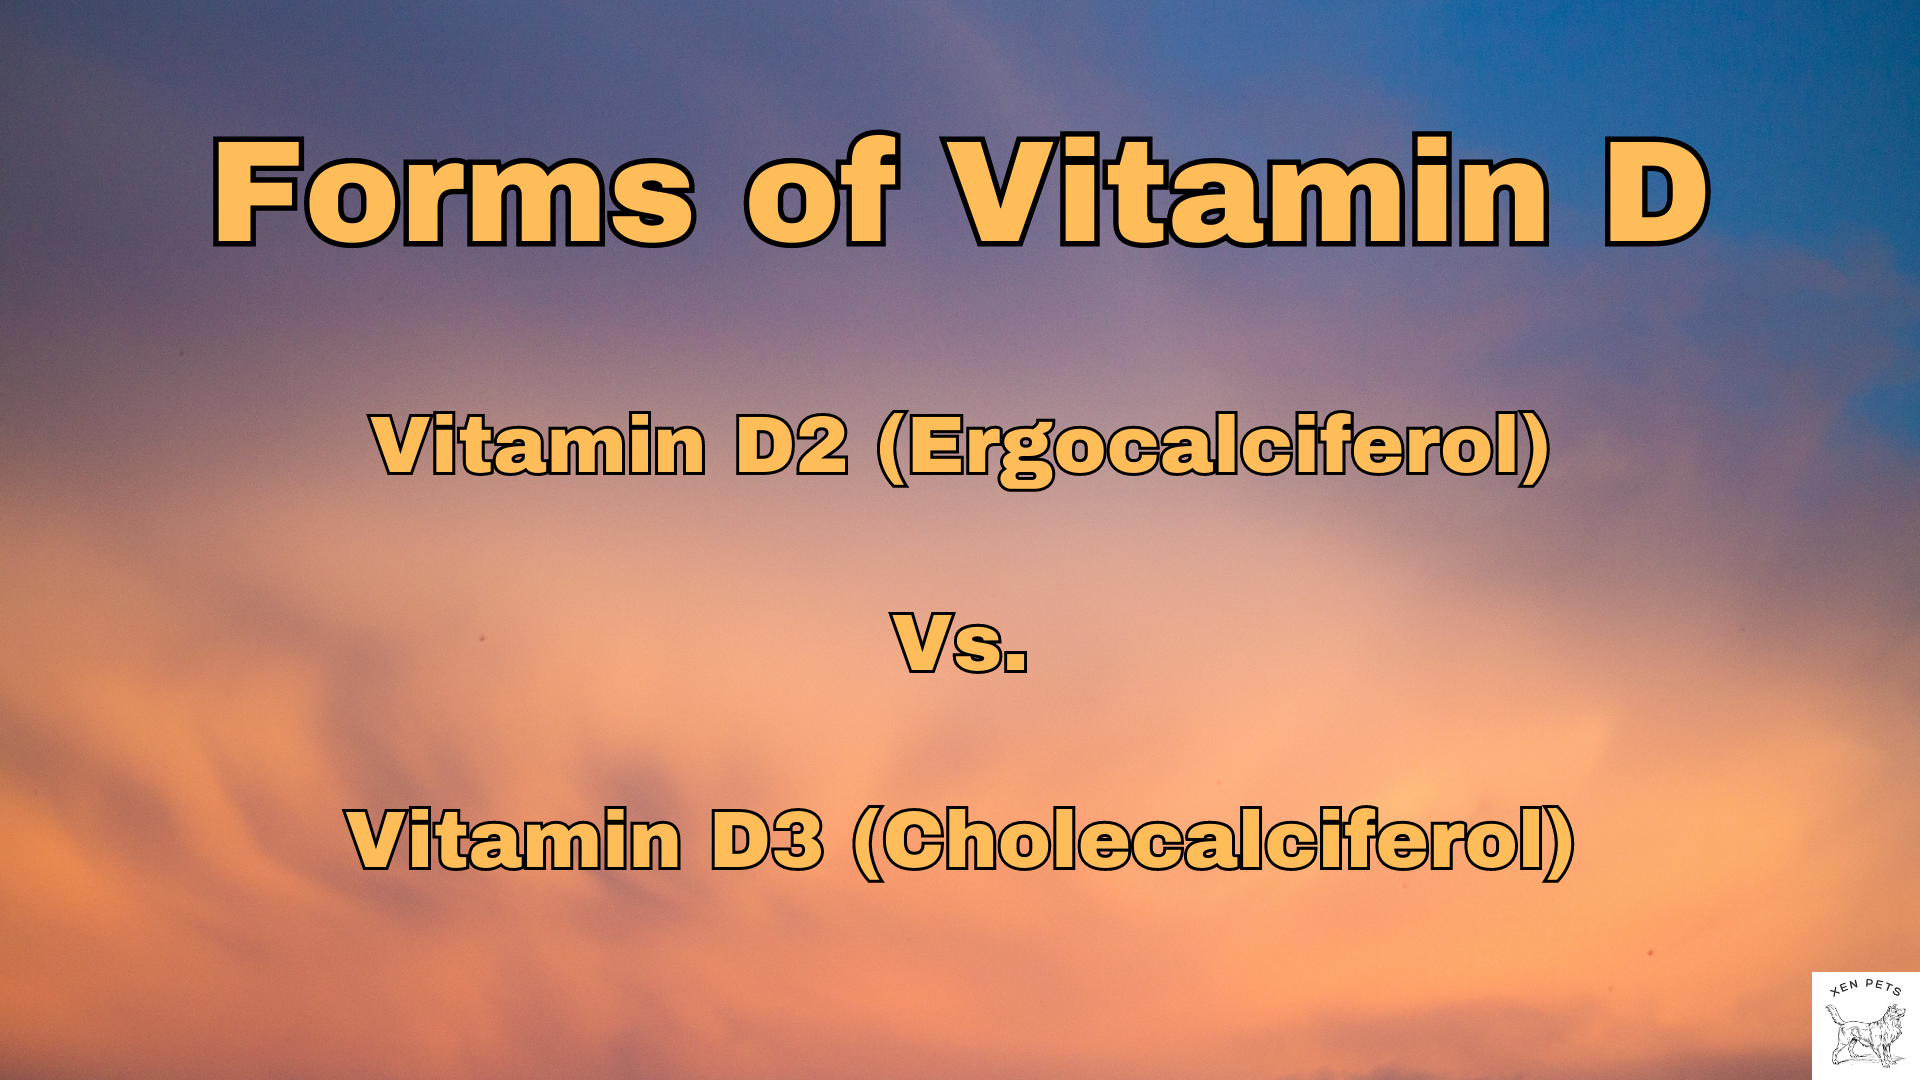 Forms of Vitamin D